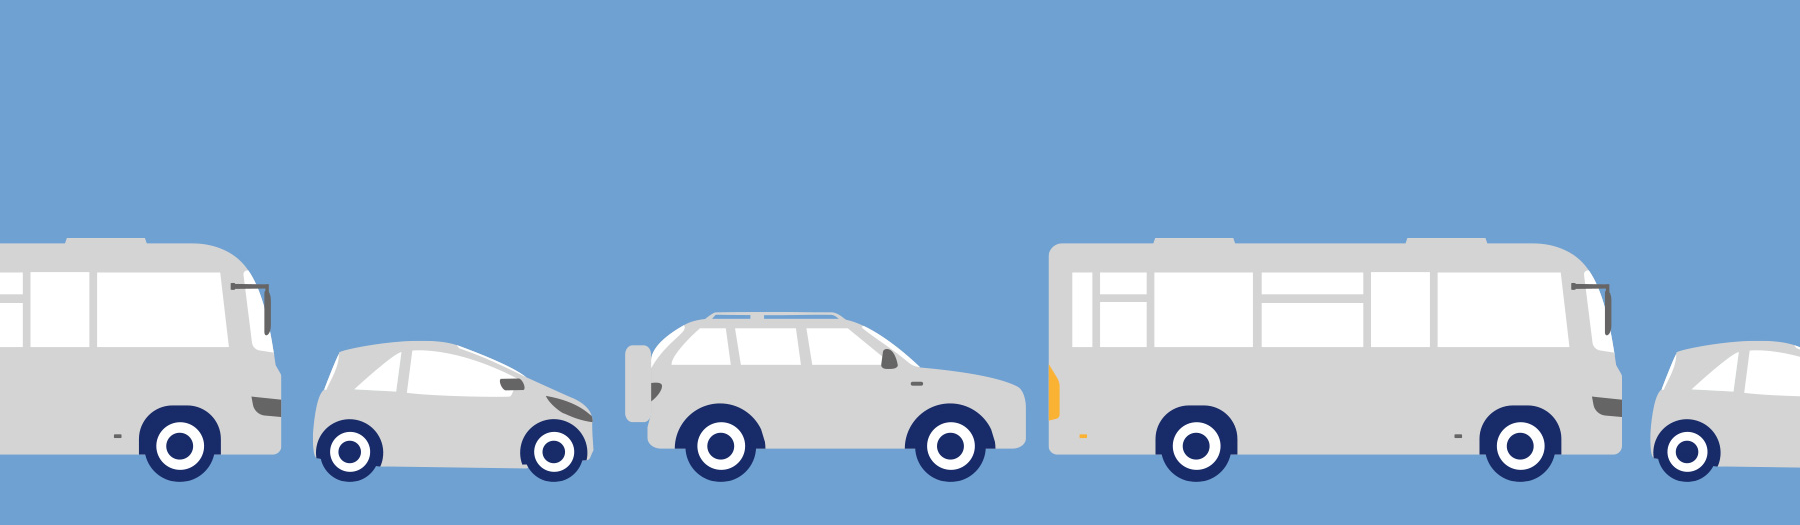 Illustration of cars and buses